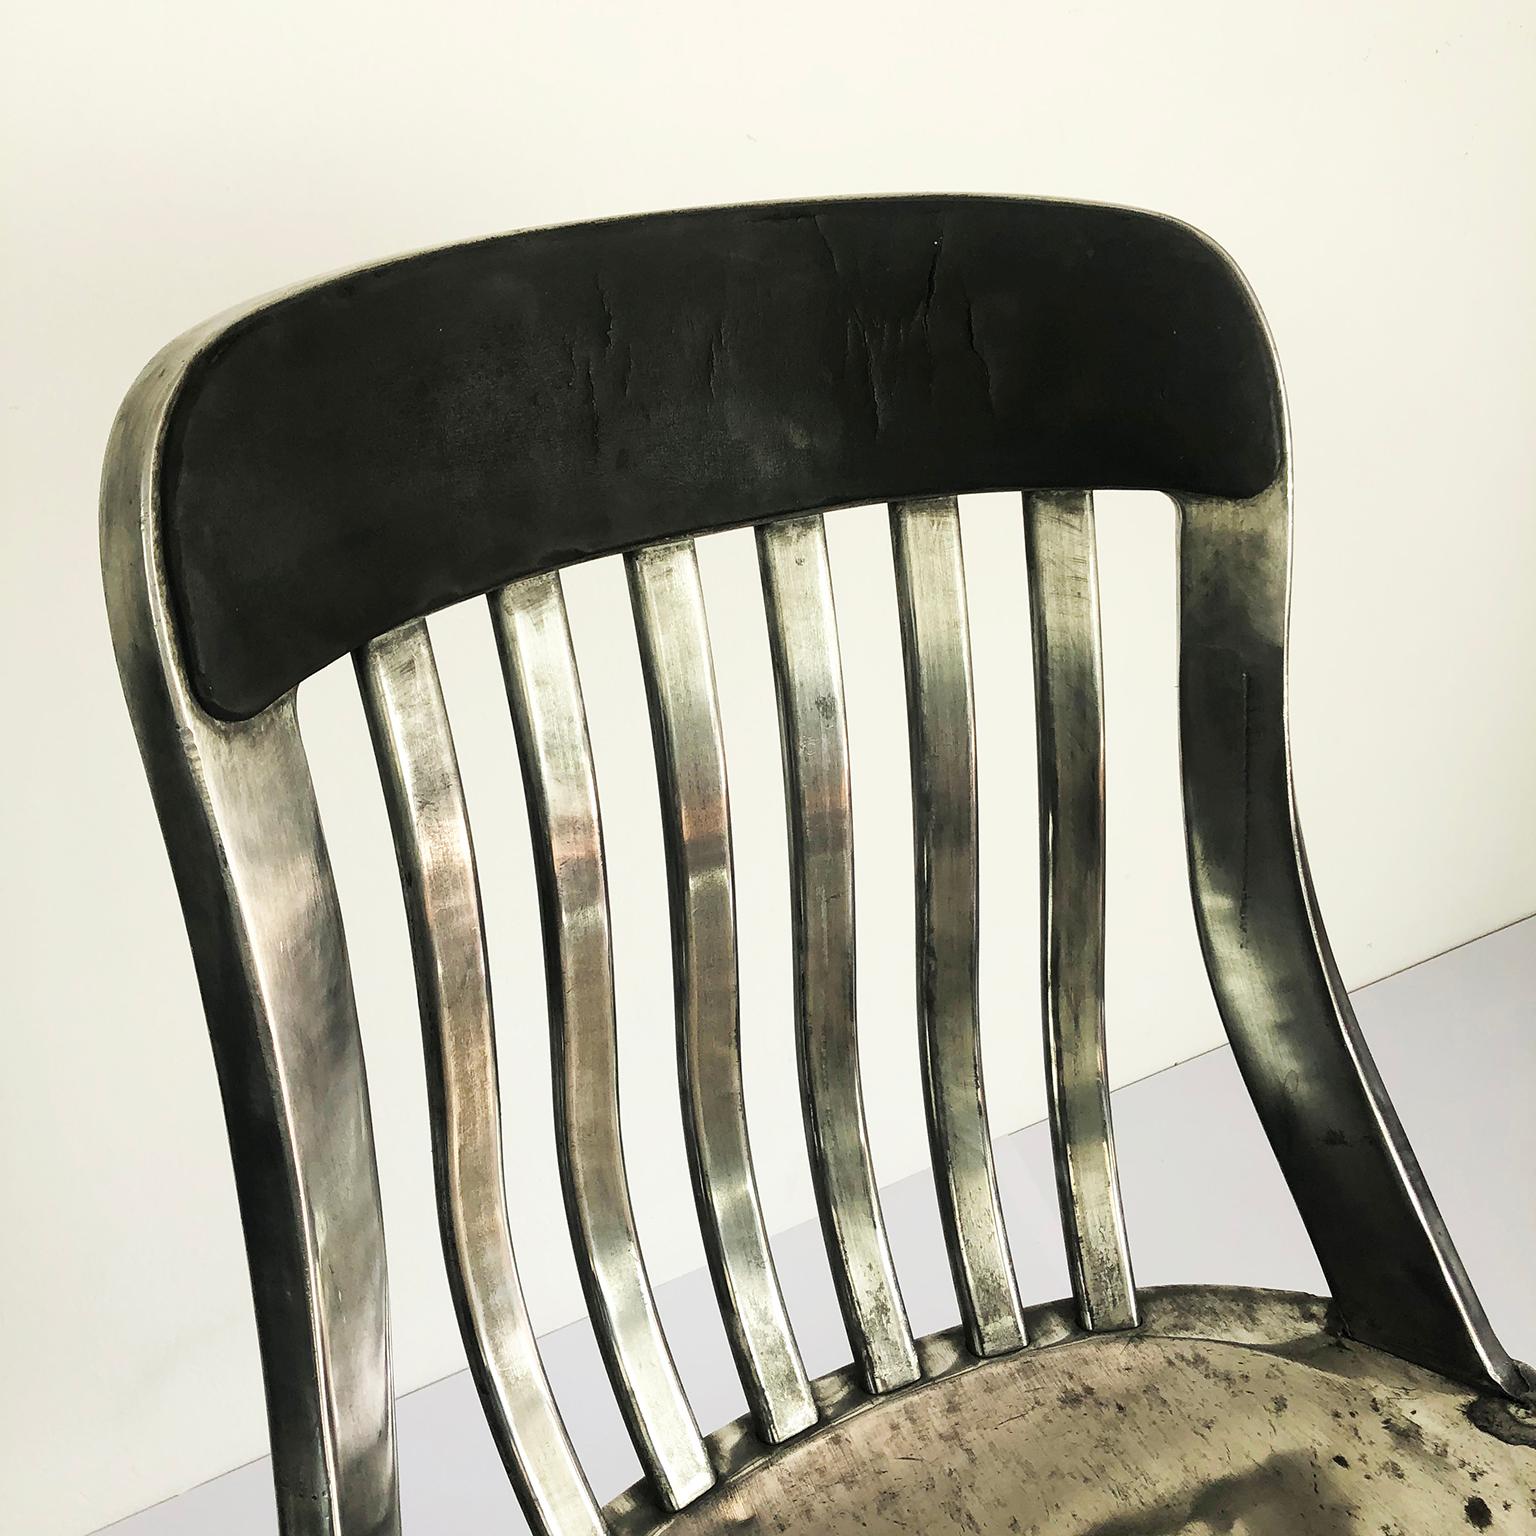 We offer an early original aluminum armchair. Made of cast and formed aluminum with a slatted undulating back and thin leather pad on the top of the backrest with original label.